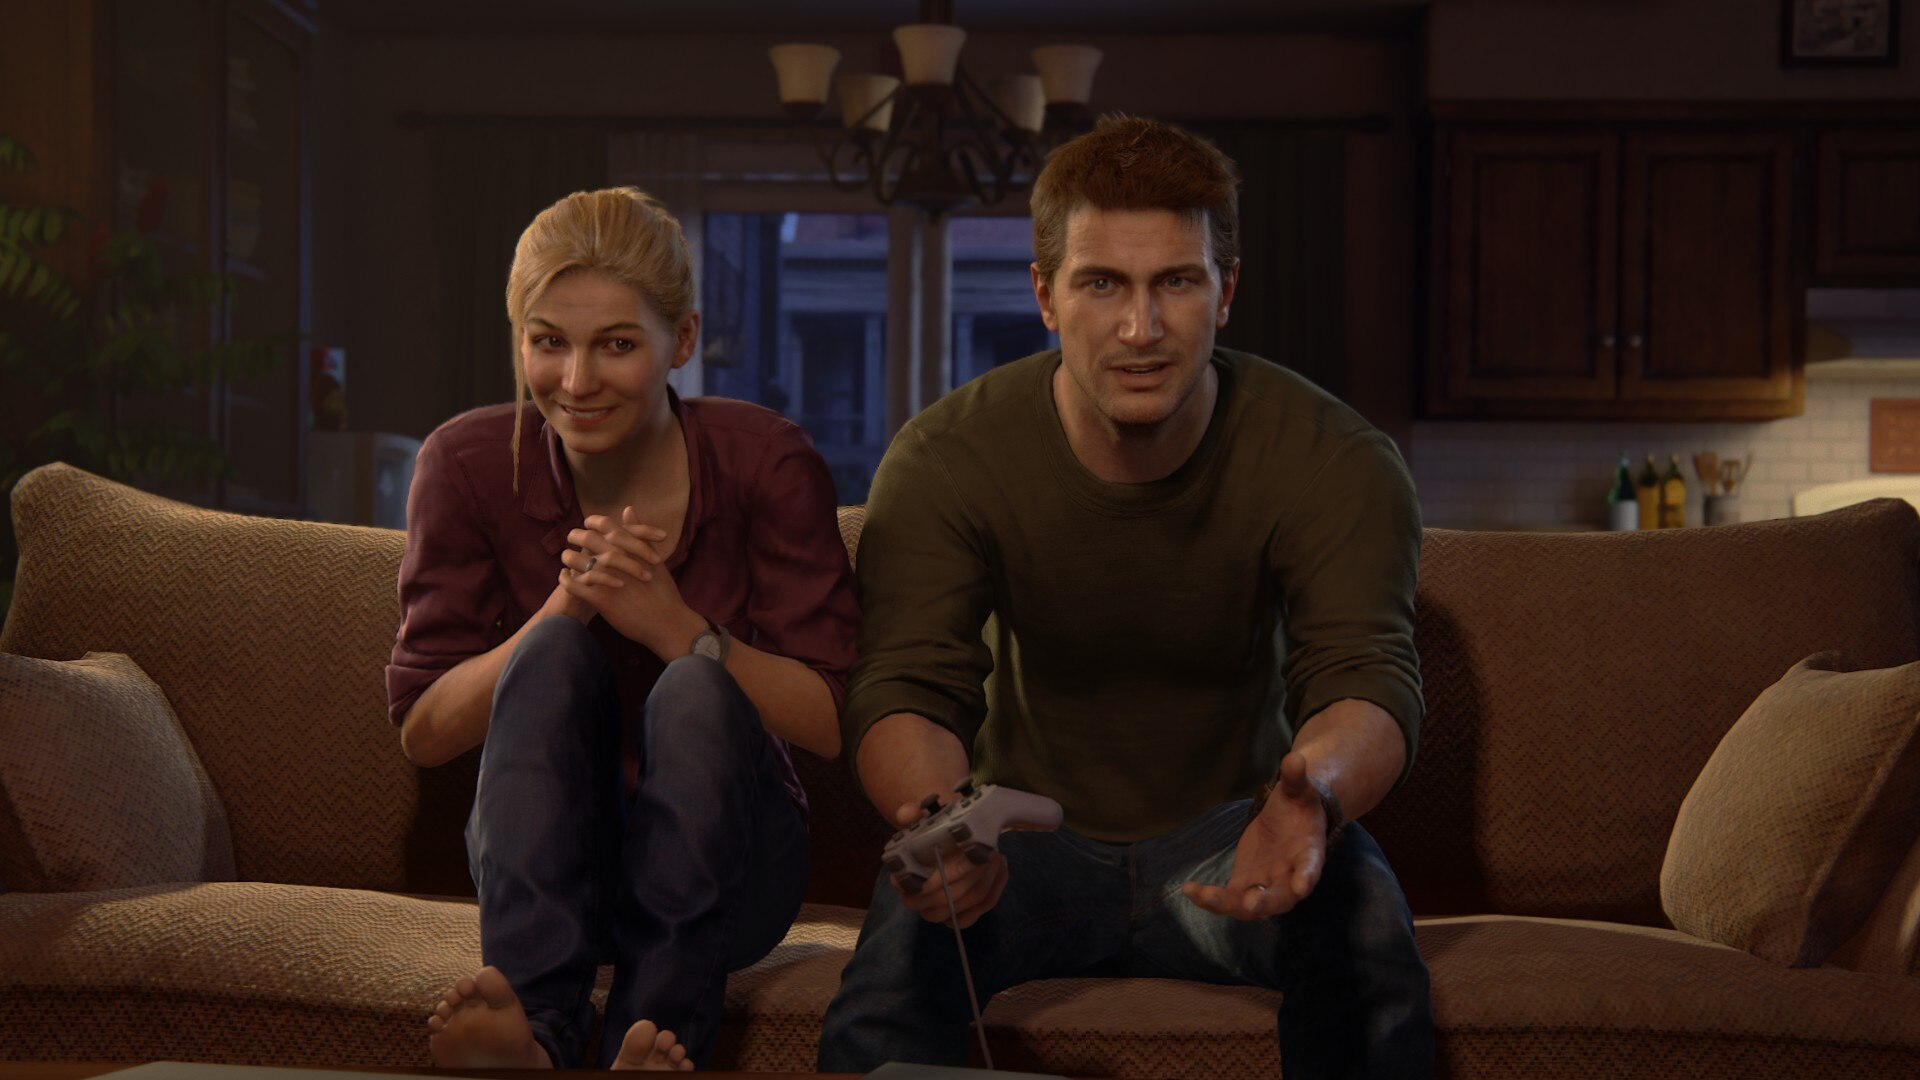   ,    Naughty Dog  The Last of Us 3   Uncharted     